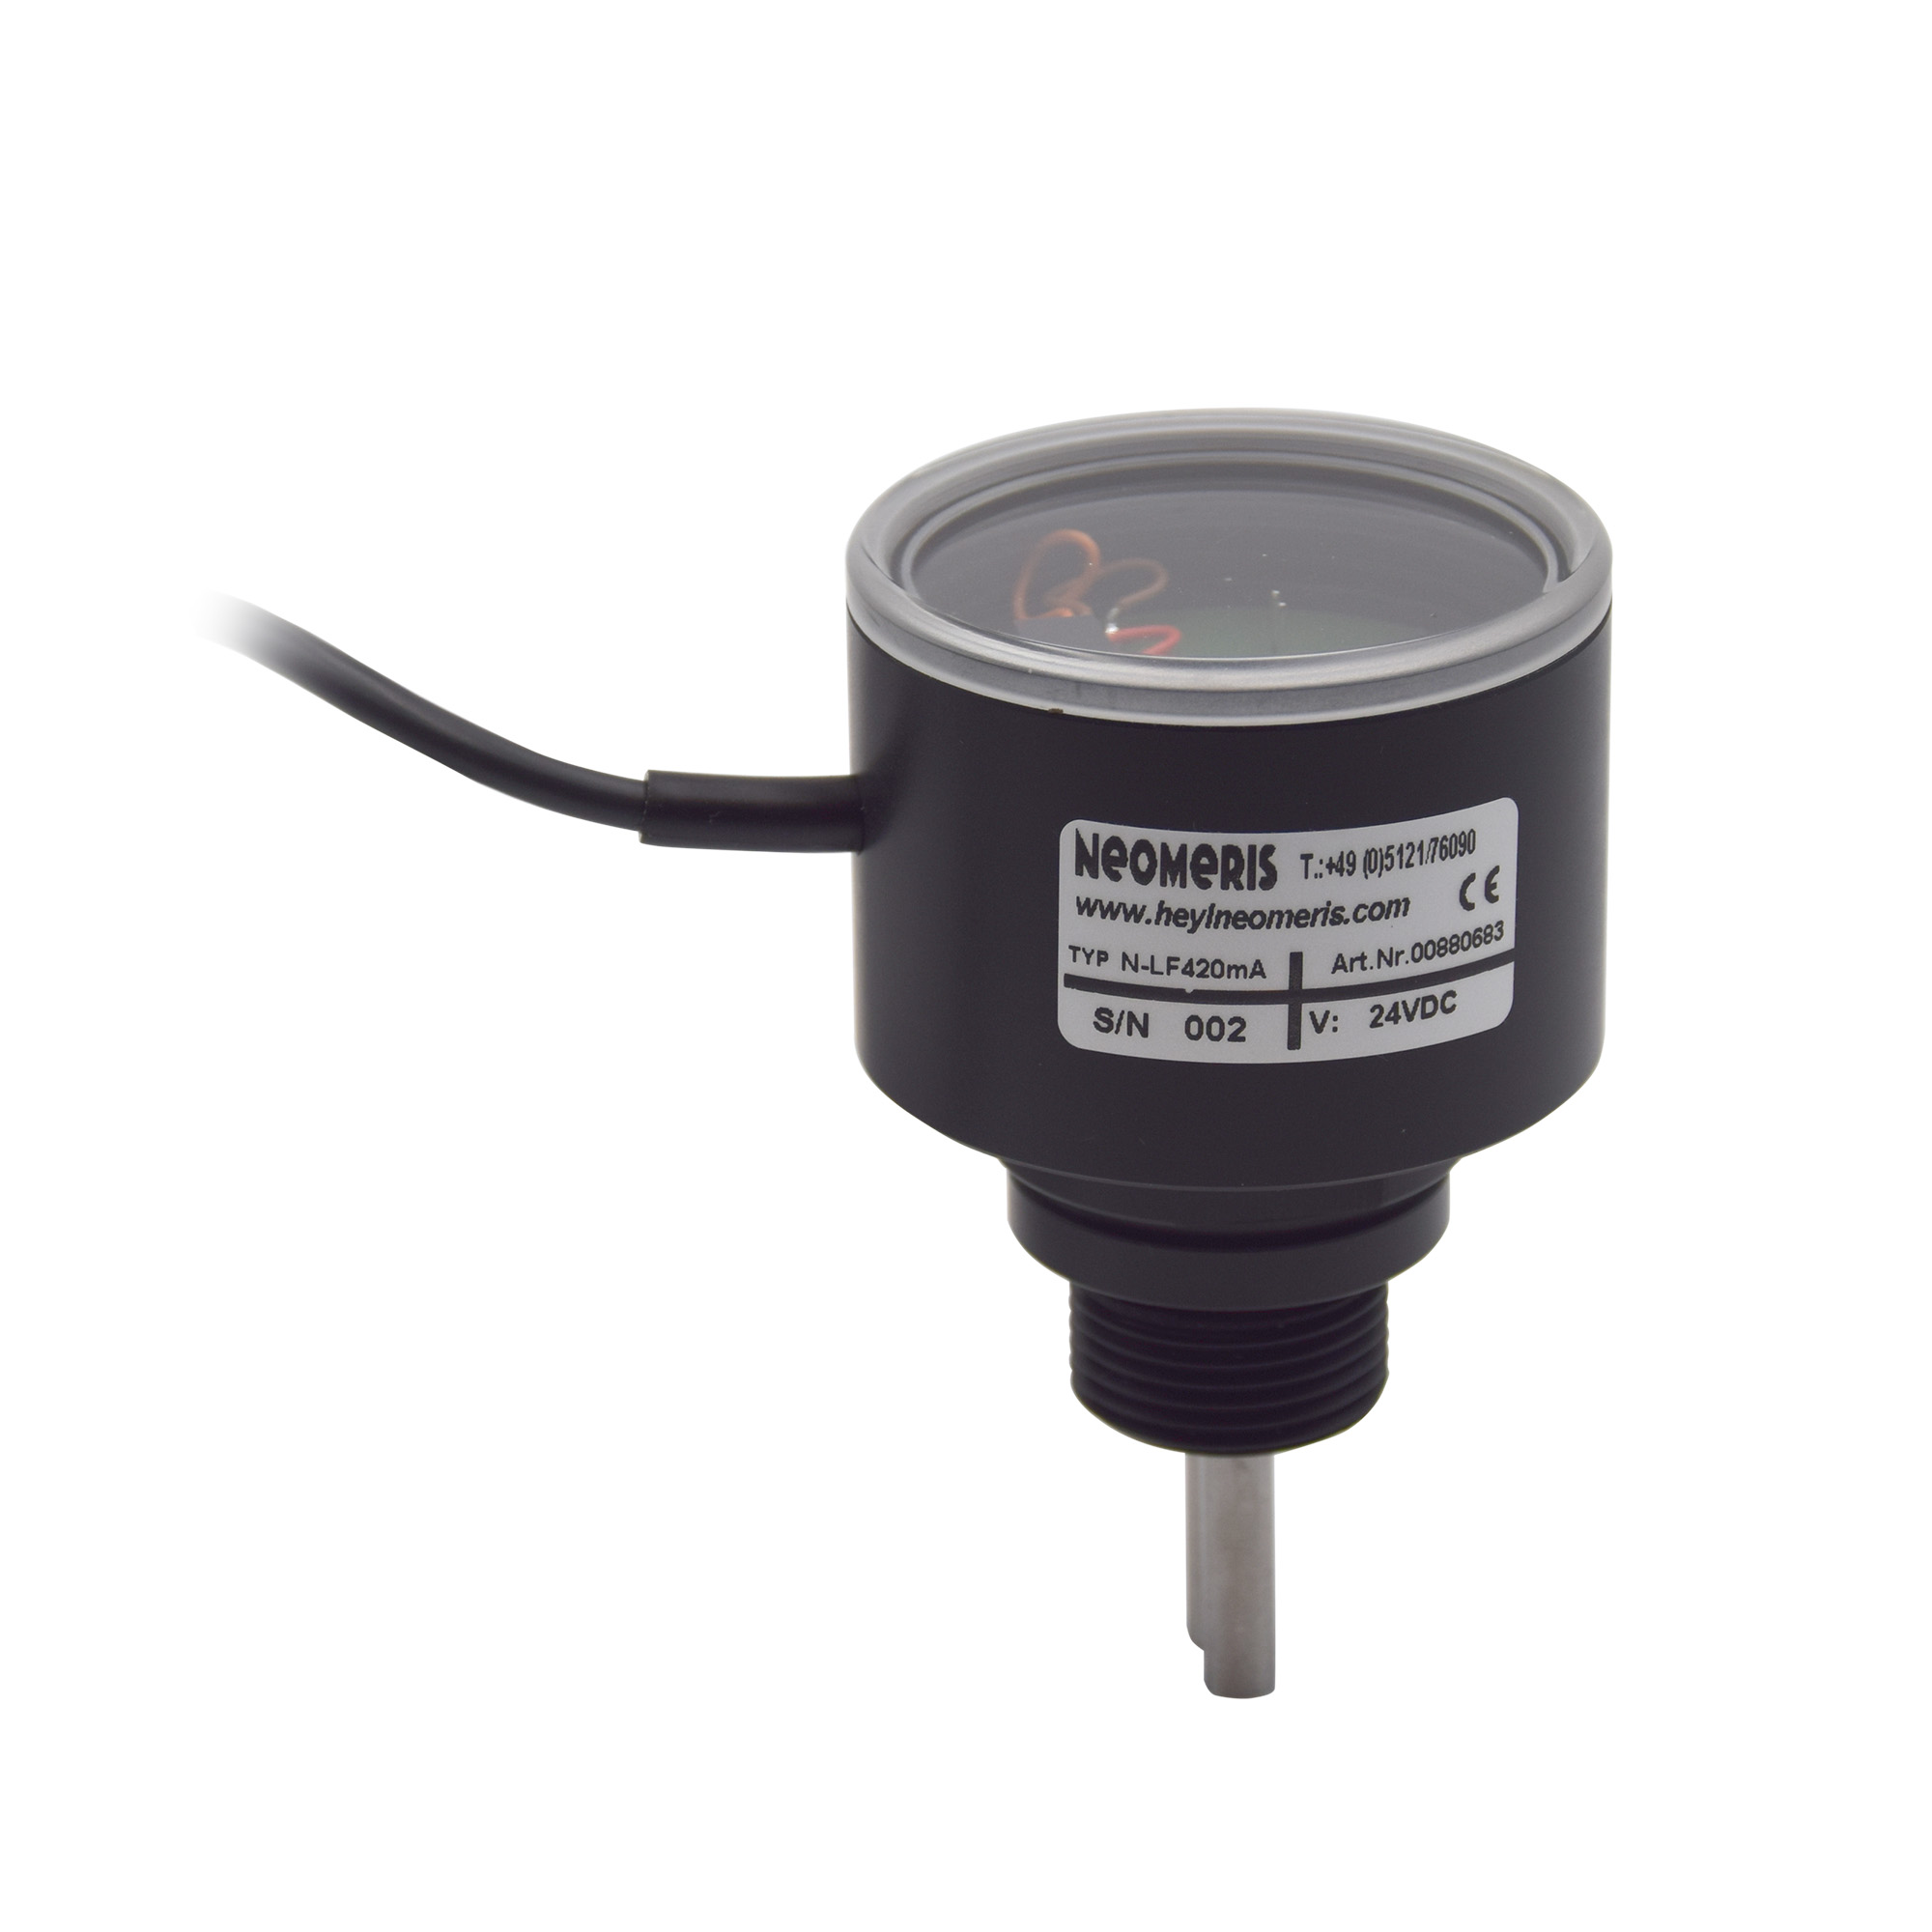 N-LF420 0-2µS conductivity meter with 4-20mA output, LED display and 3/4 inch screw-in thread